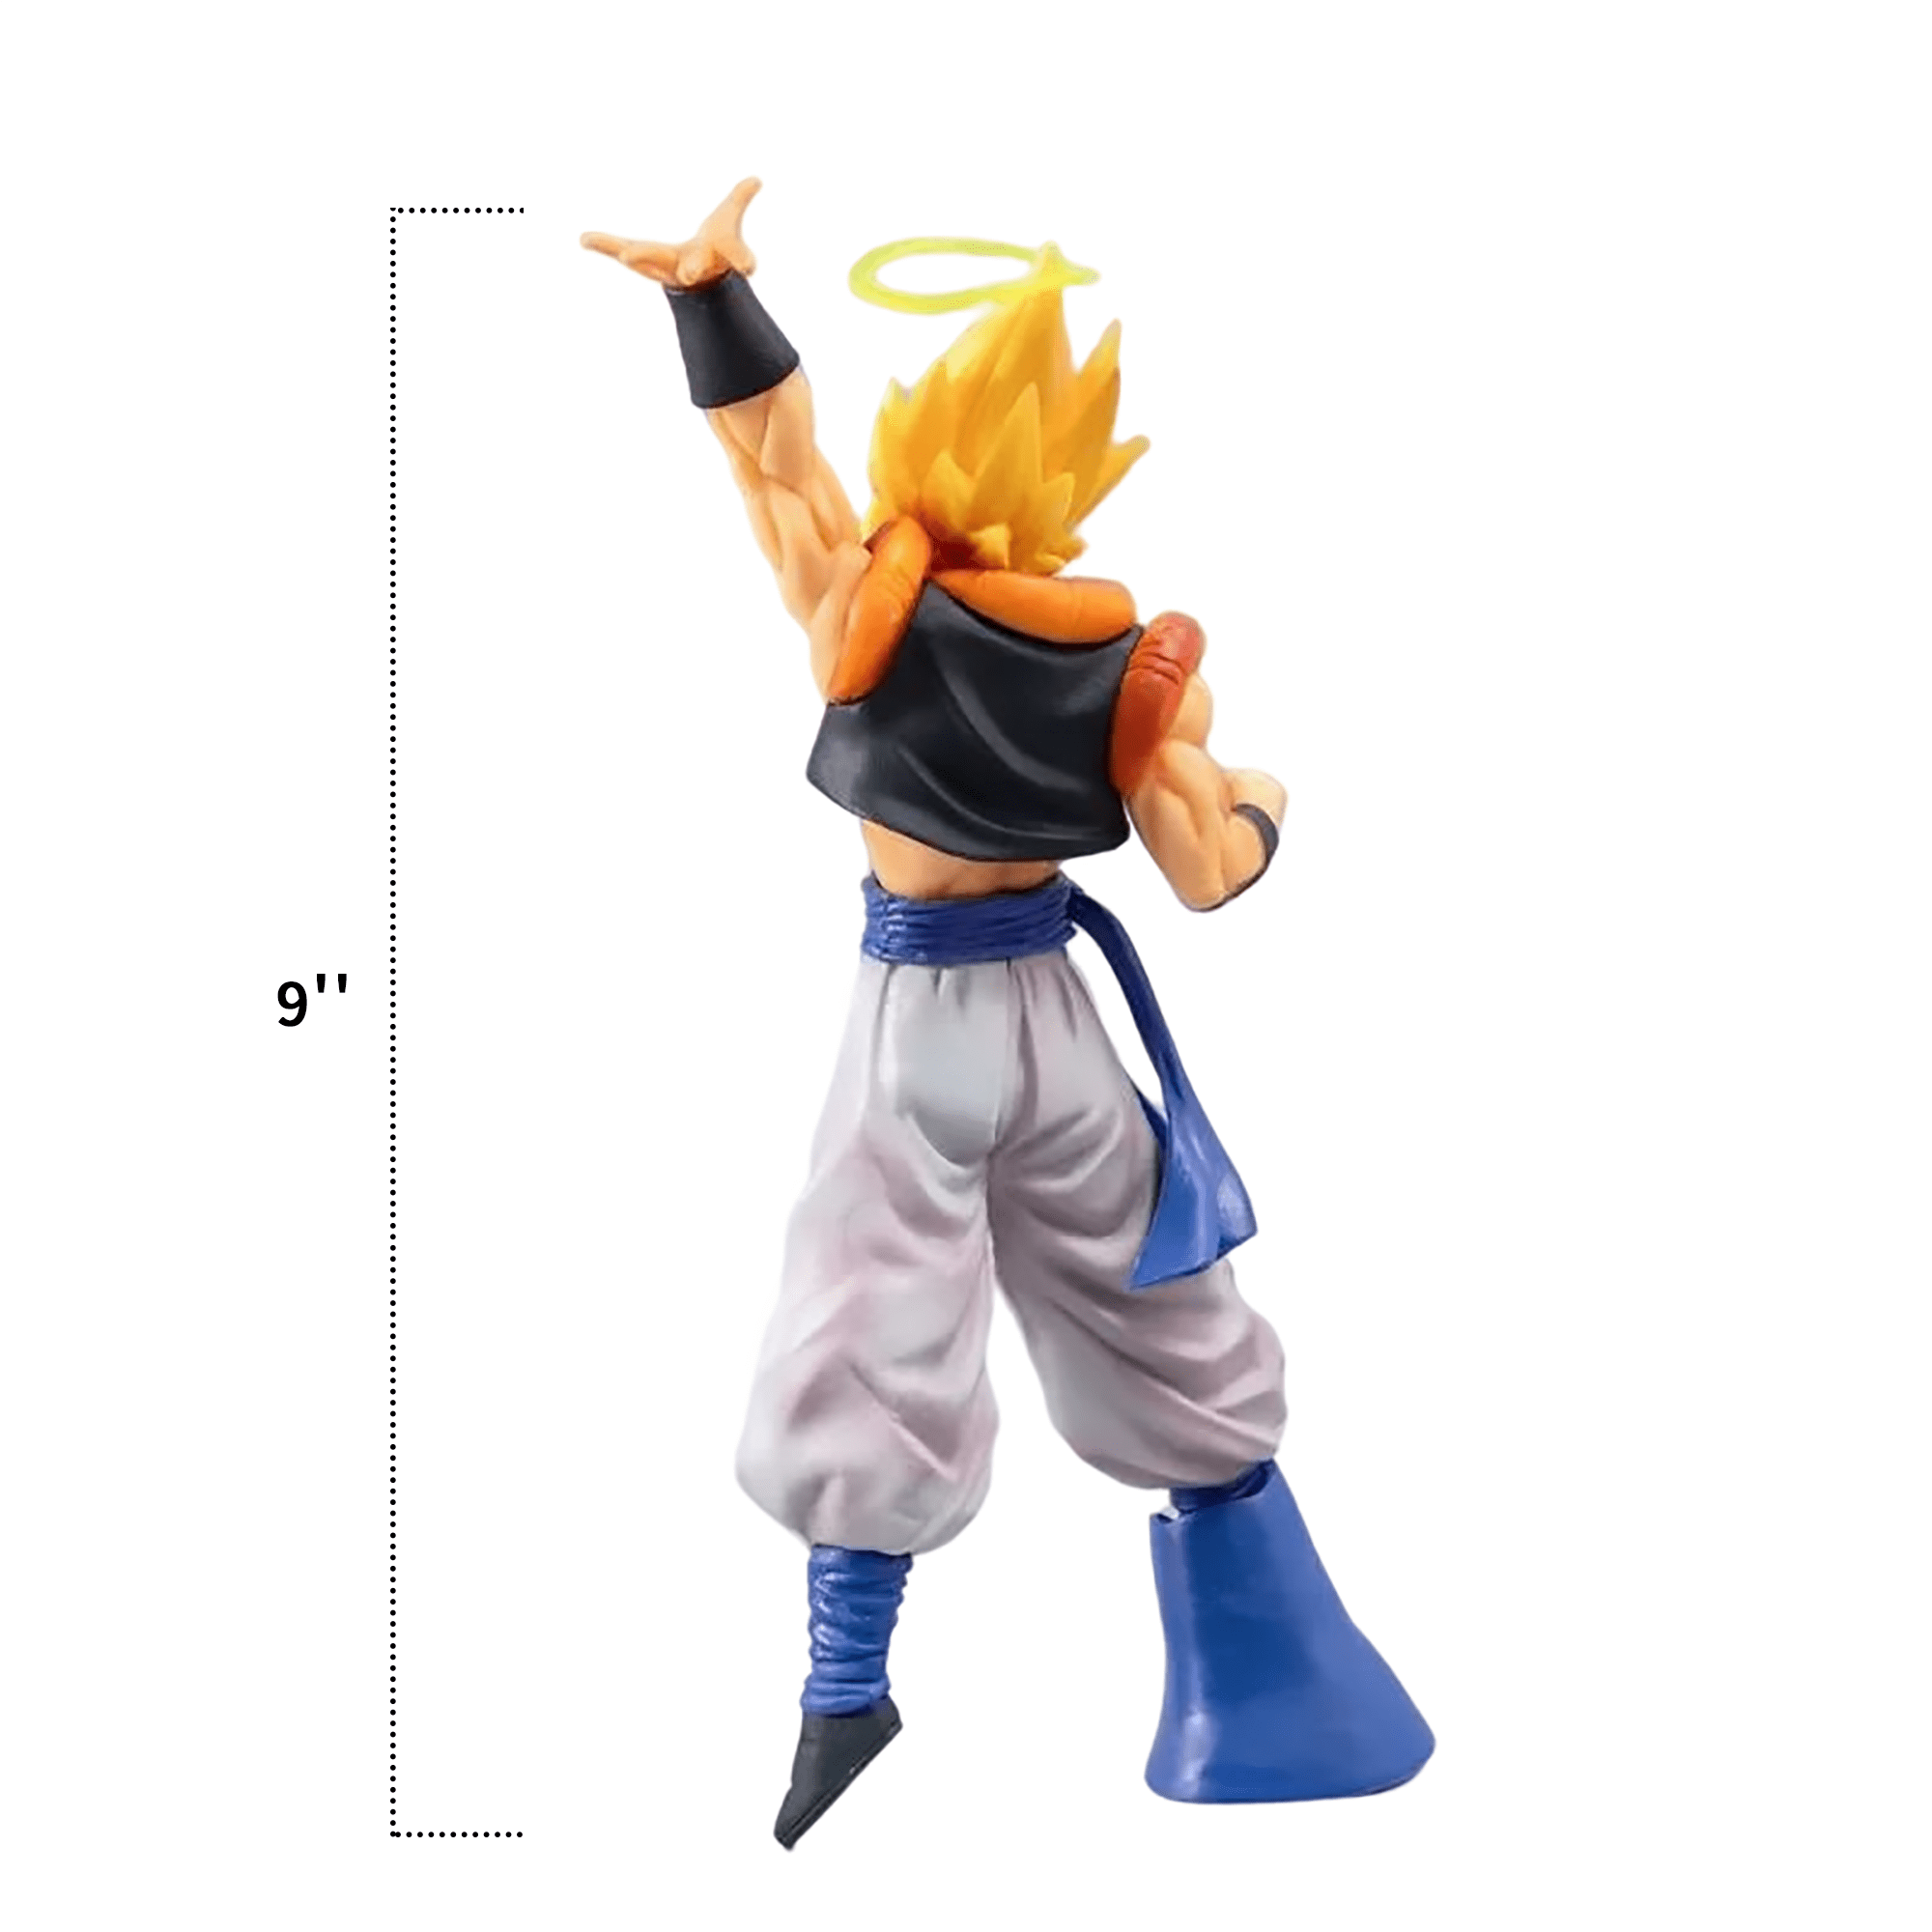 gogeta！click link to the Halloween raffle is in my bio and the prize is a  repainted Jiren figure! Another draw link for patreon subscribers…